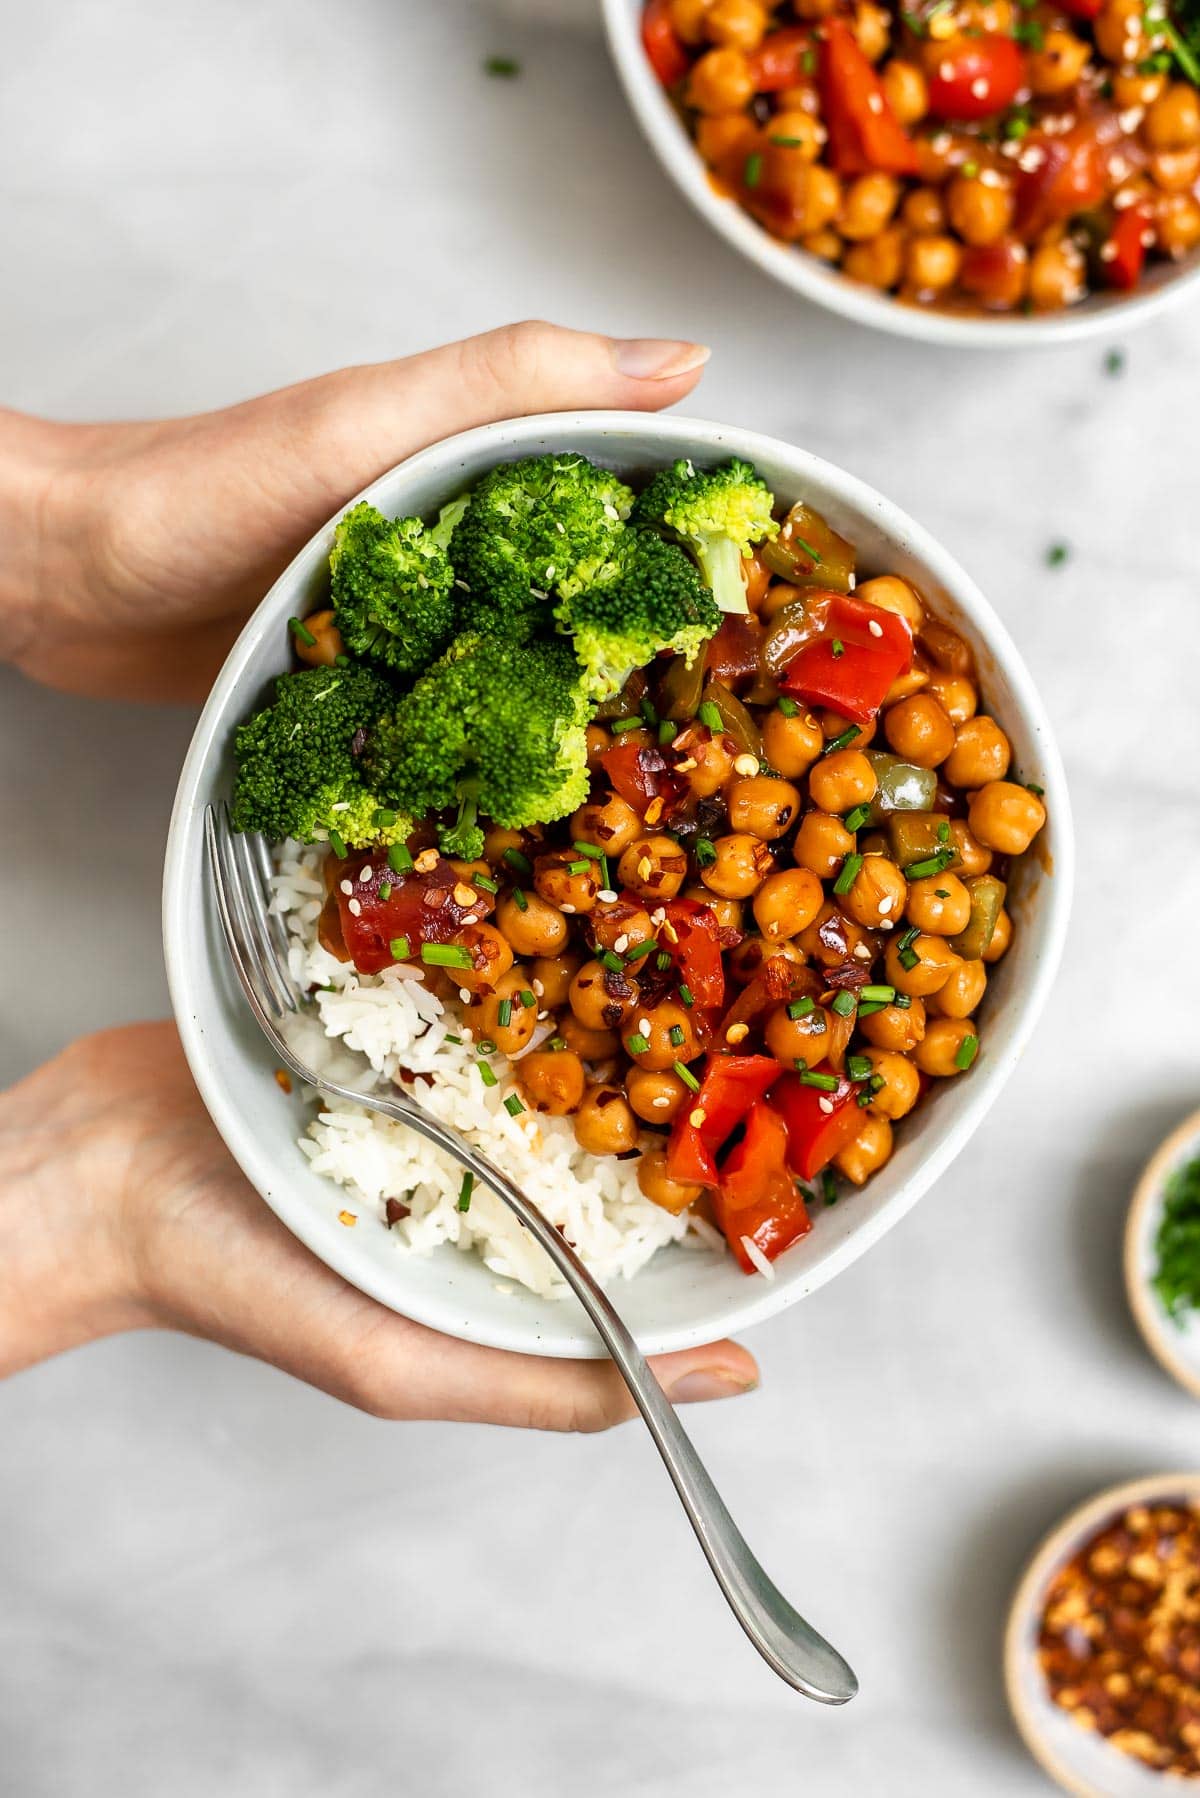 Hands holding the chickpea stir fry in a small blue bowl.